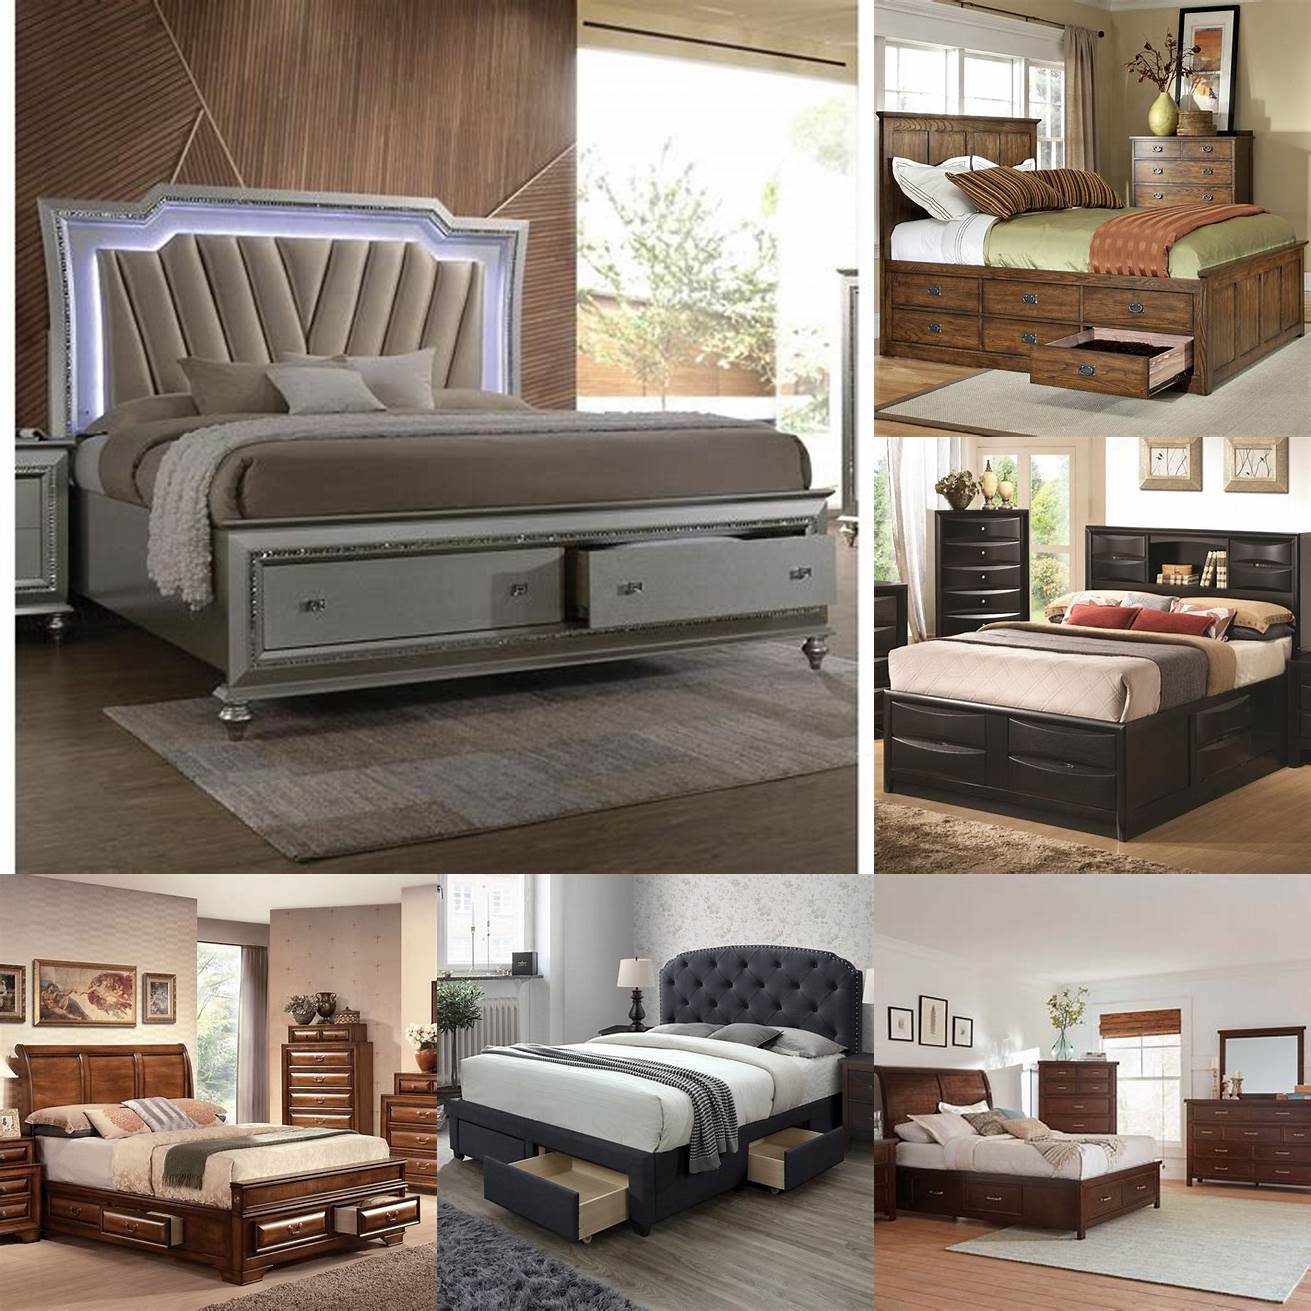 Storage Eastern King Bed - a bed with built-in storage drawers or compartments